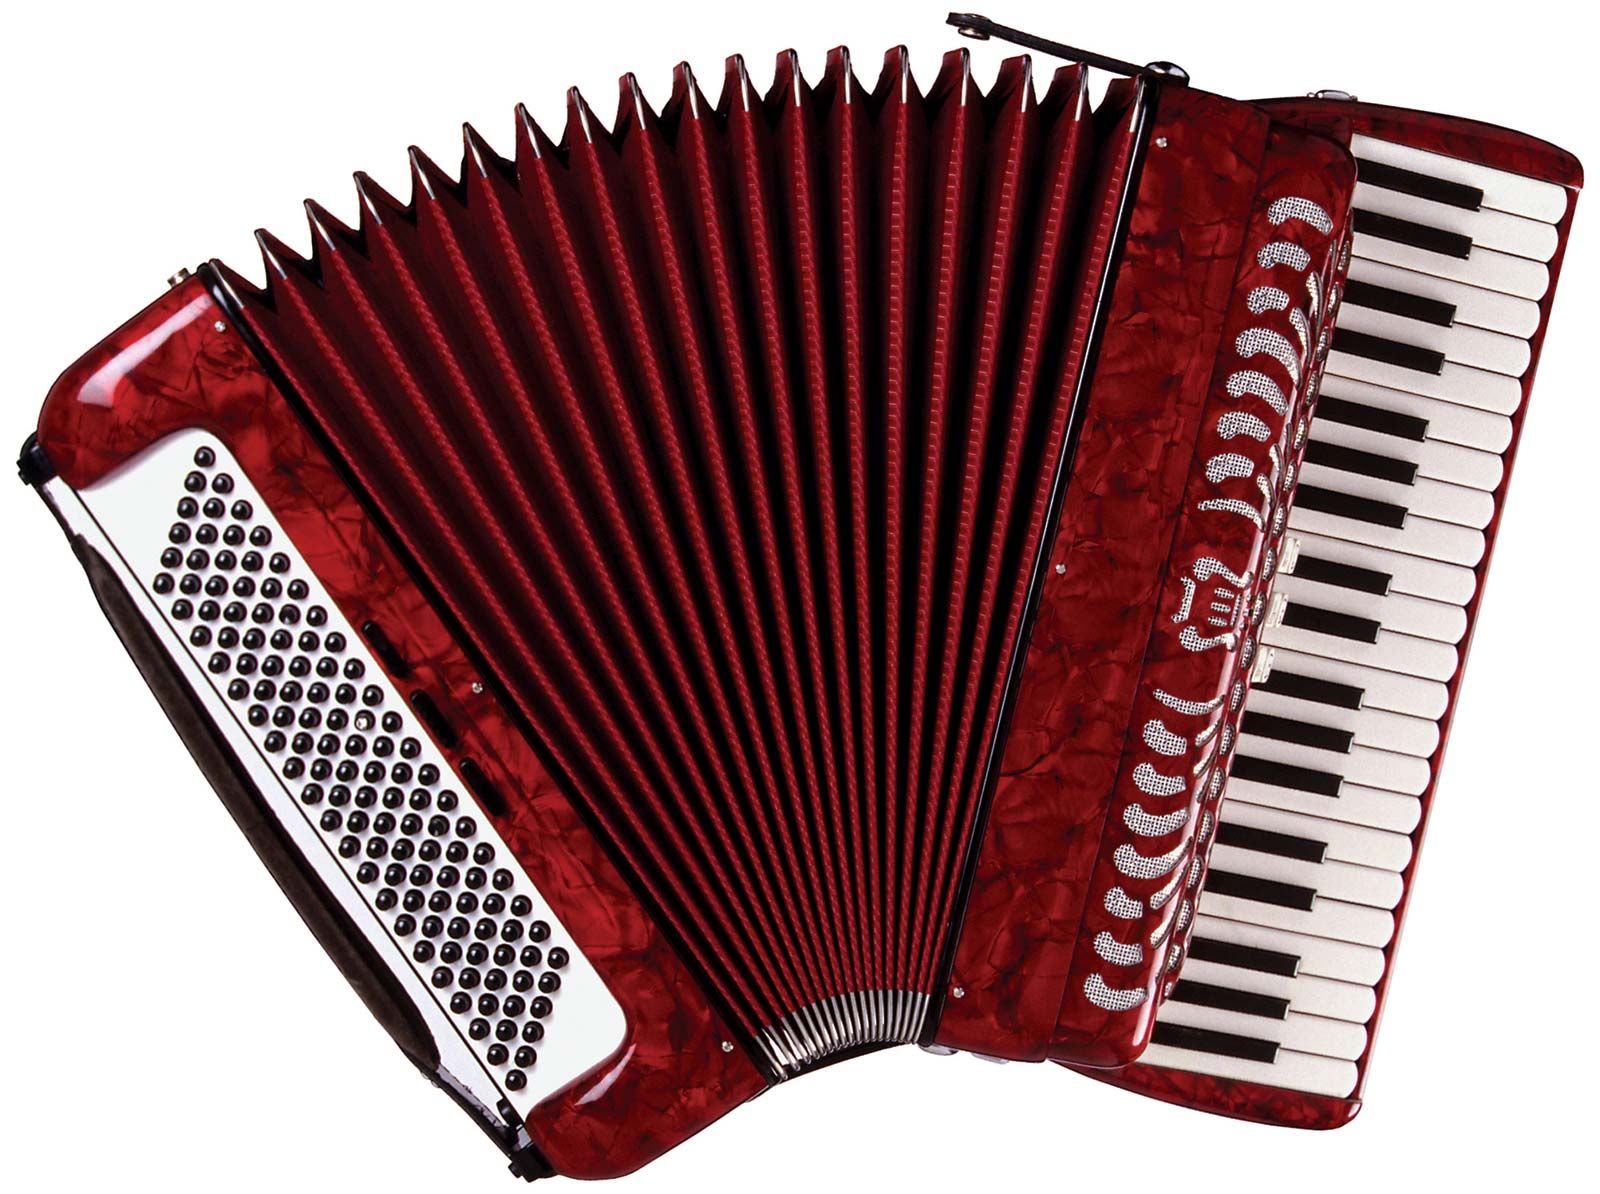 A Beginner’s Guide to the Accordion